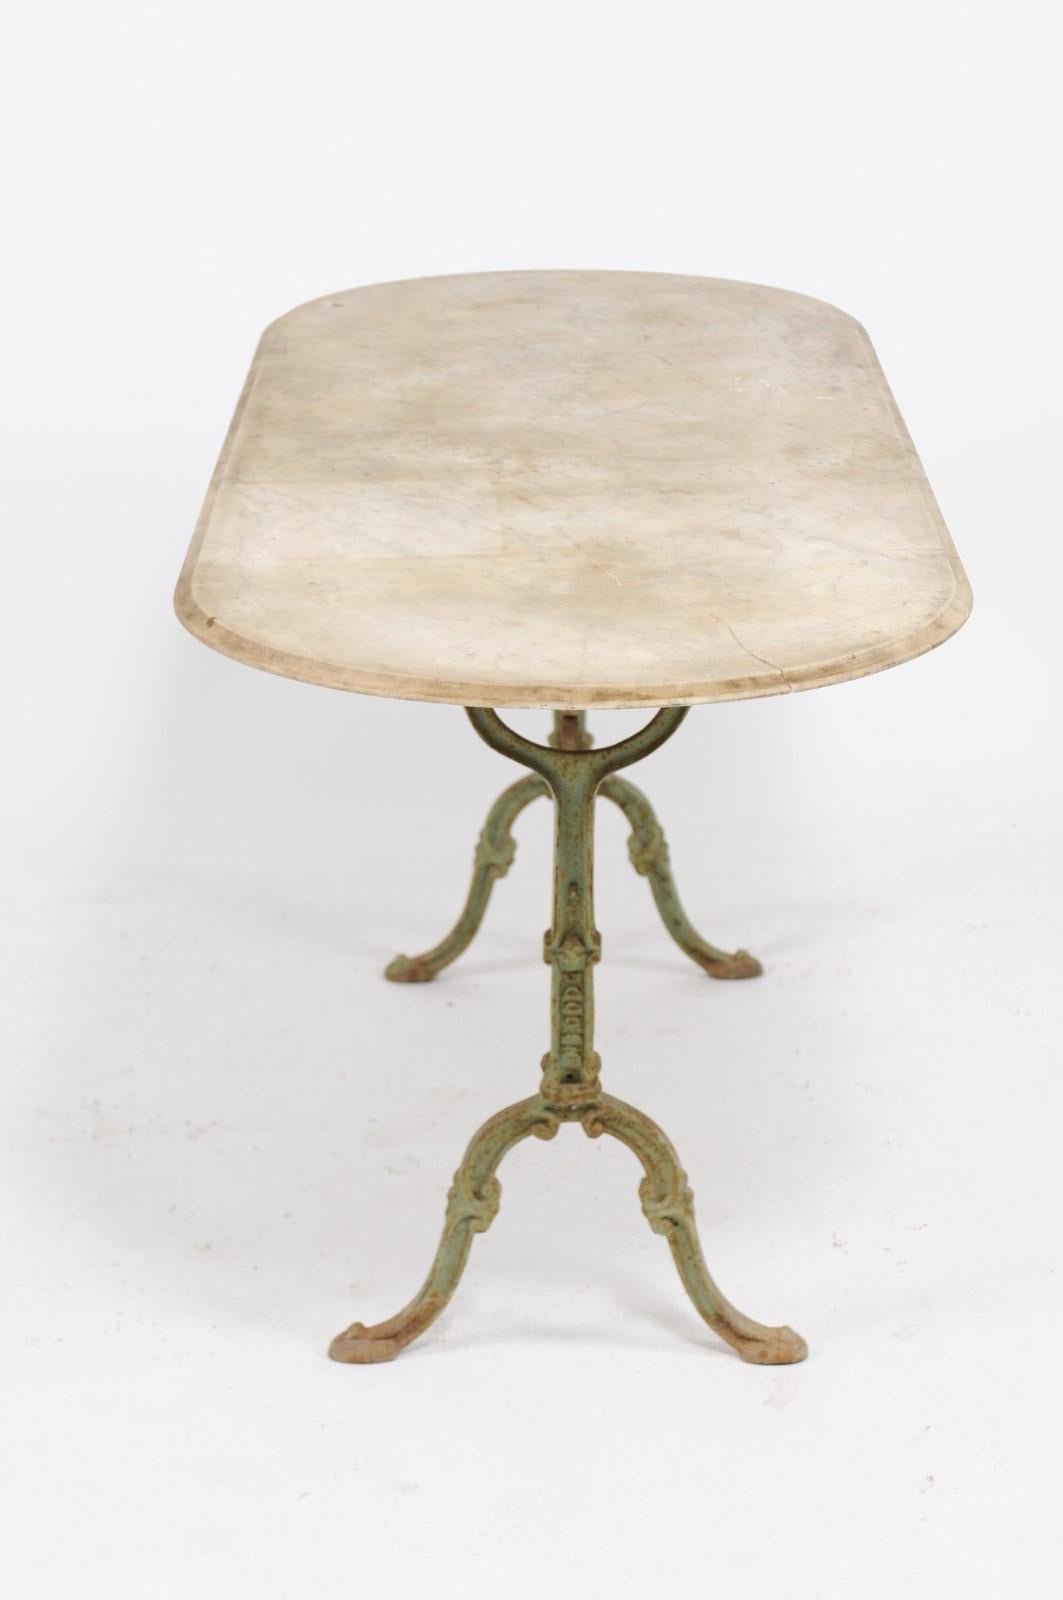 A French Napoleon III period iron bistro table from the mid-19th century, with oval marble top. Born in France during the early years of Emperor Napoleon III's reign, this authentic French bistro table features an oval marble top sitting above an